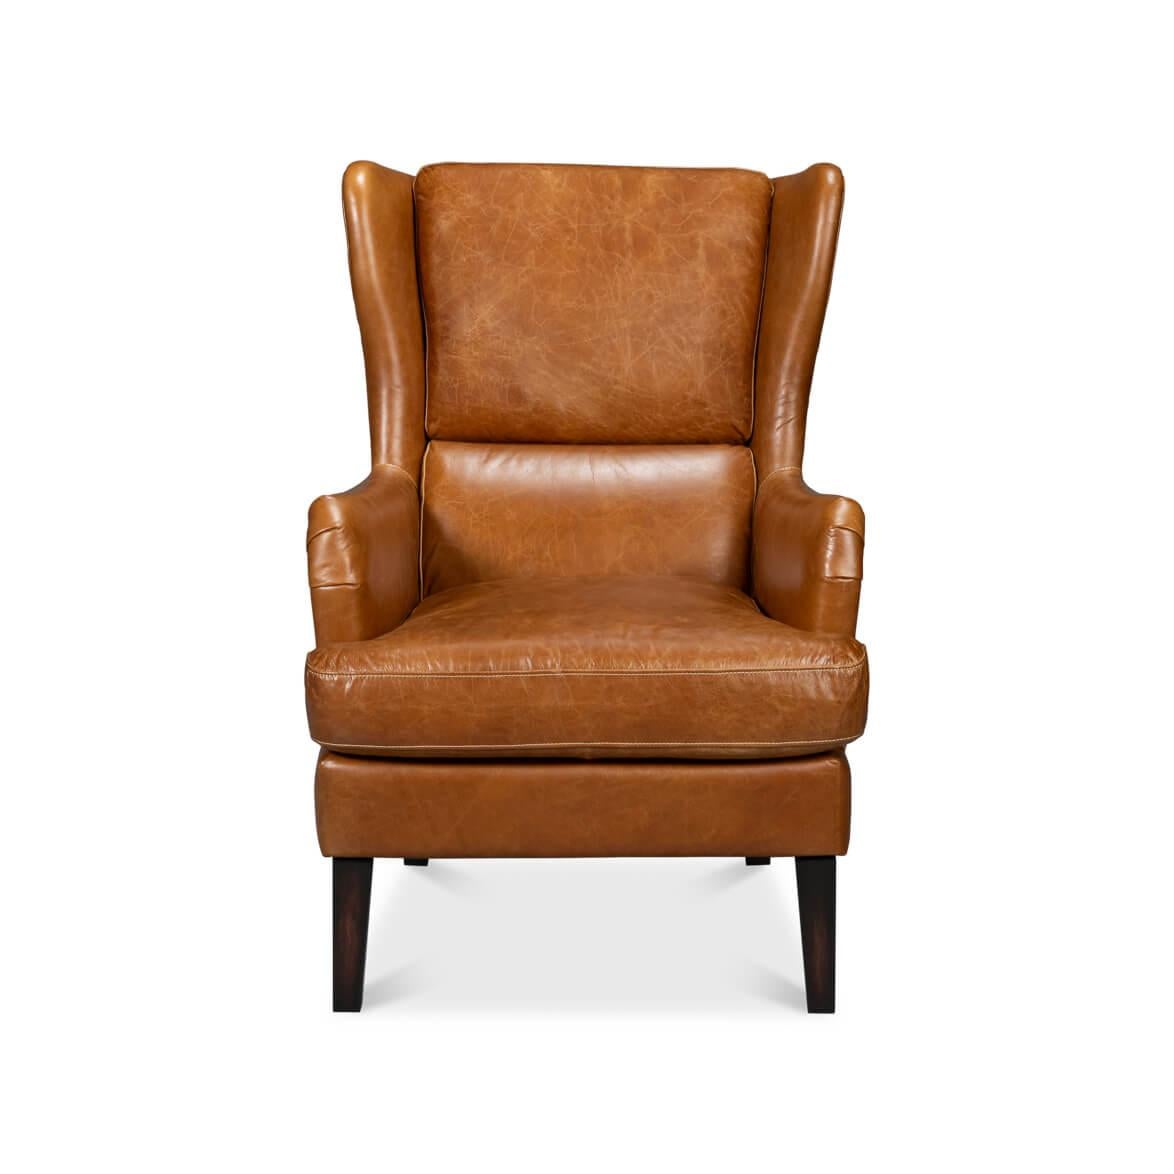 With the Cuban brown traditional top grain Vintage style leather, with high classic wingback backrest and boxed cushion seat raised on tapered legs. Dimensions: 28